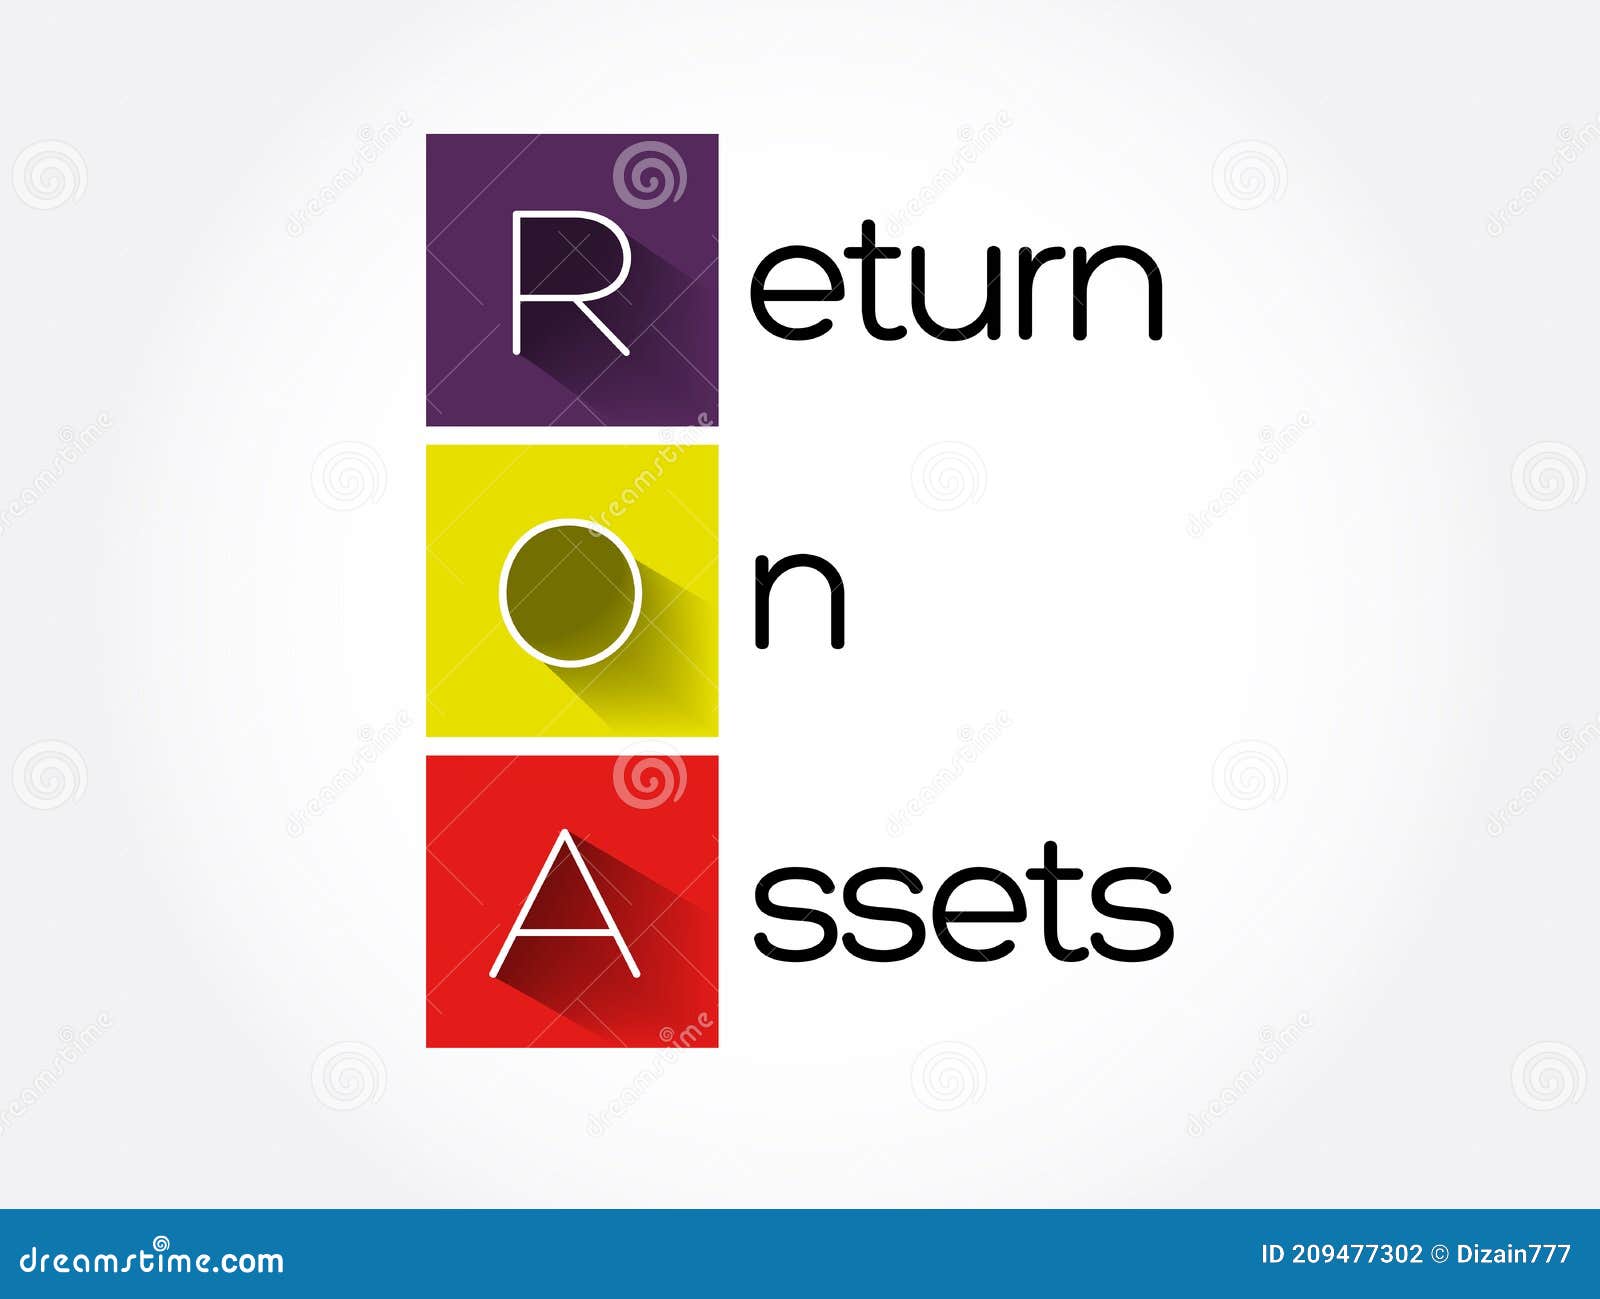 roa - return on assets acronym, business concept background